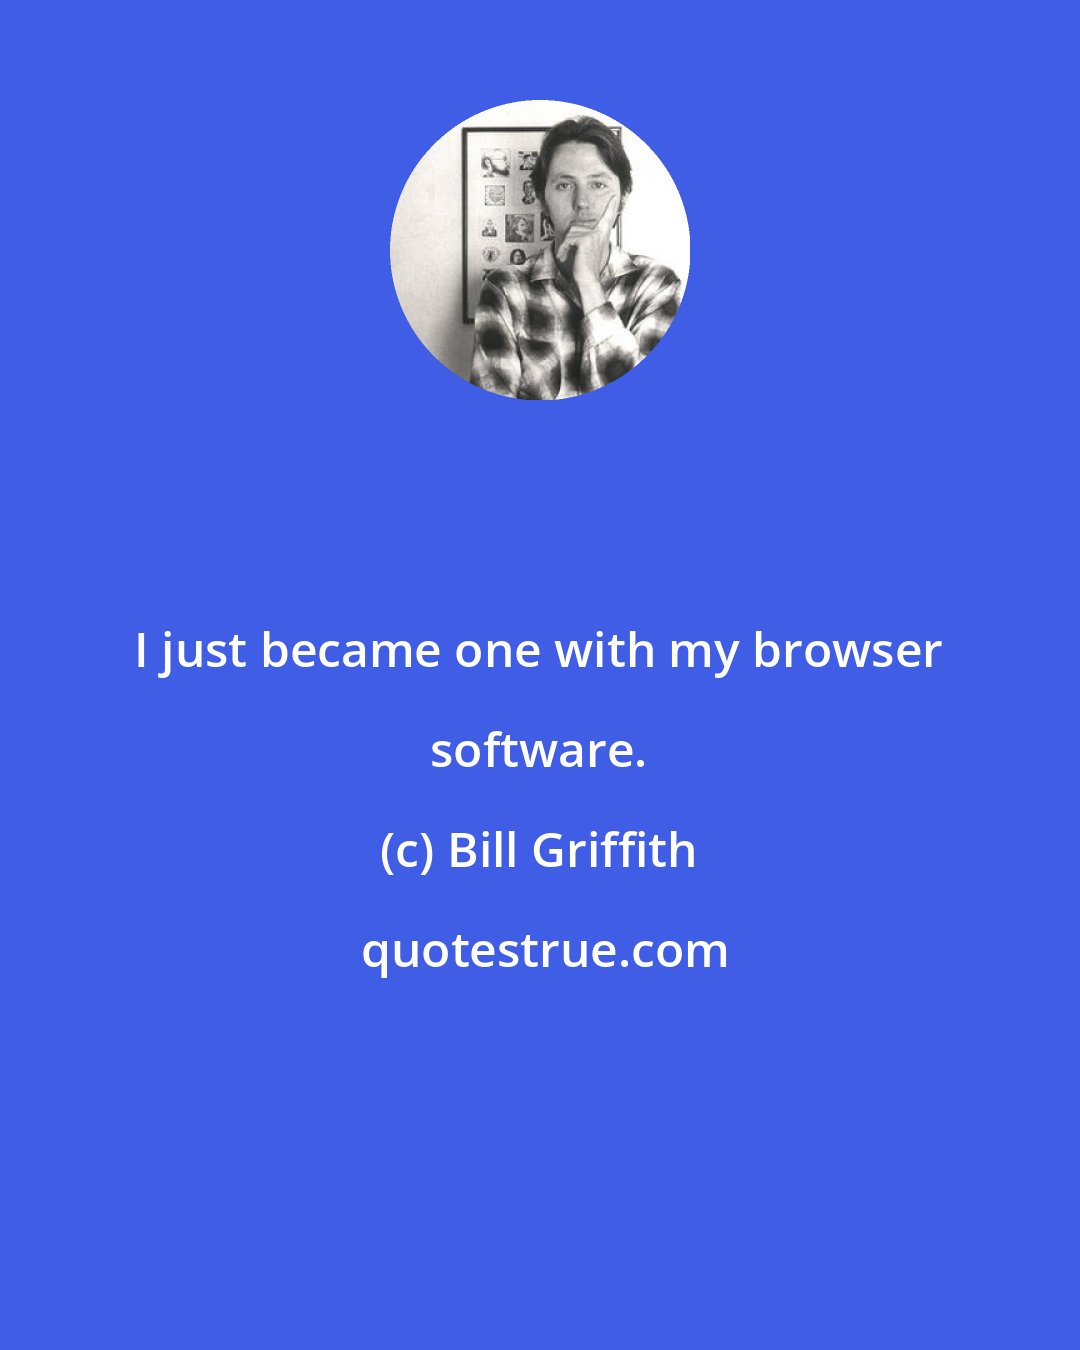 Bill Griffith: I just became one with my browser software.